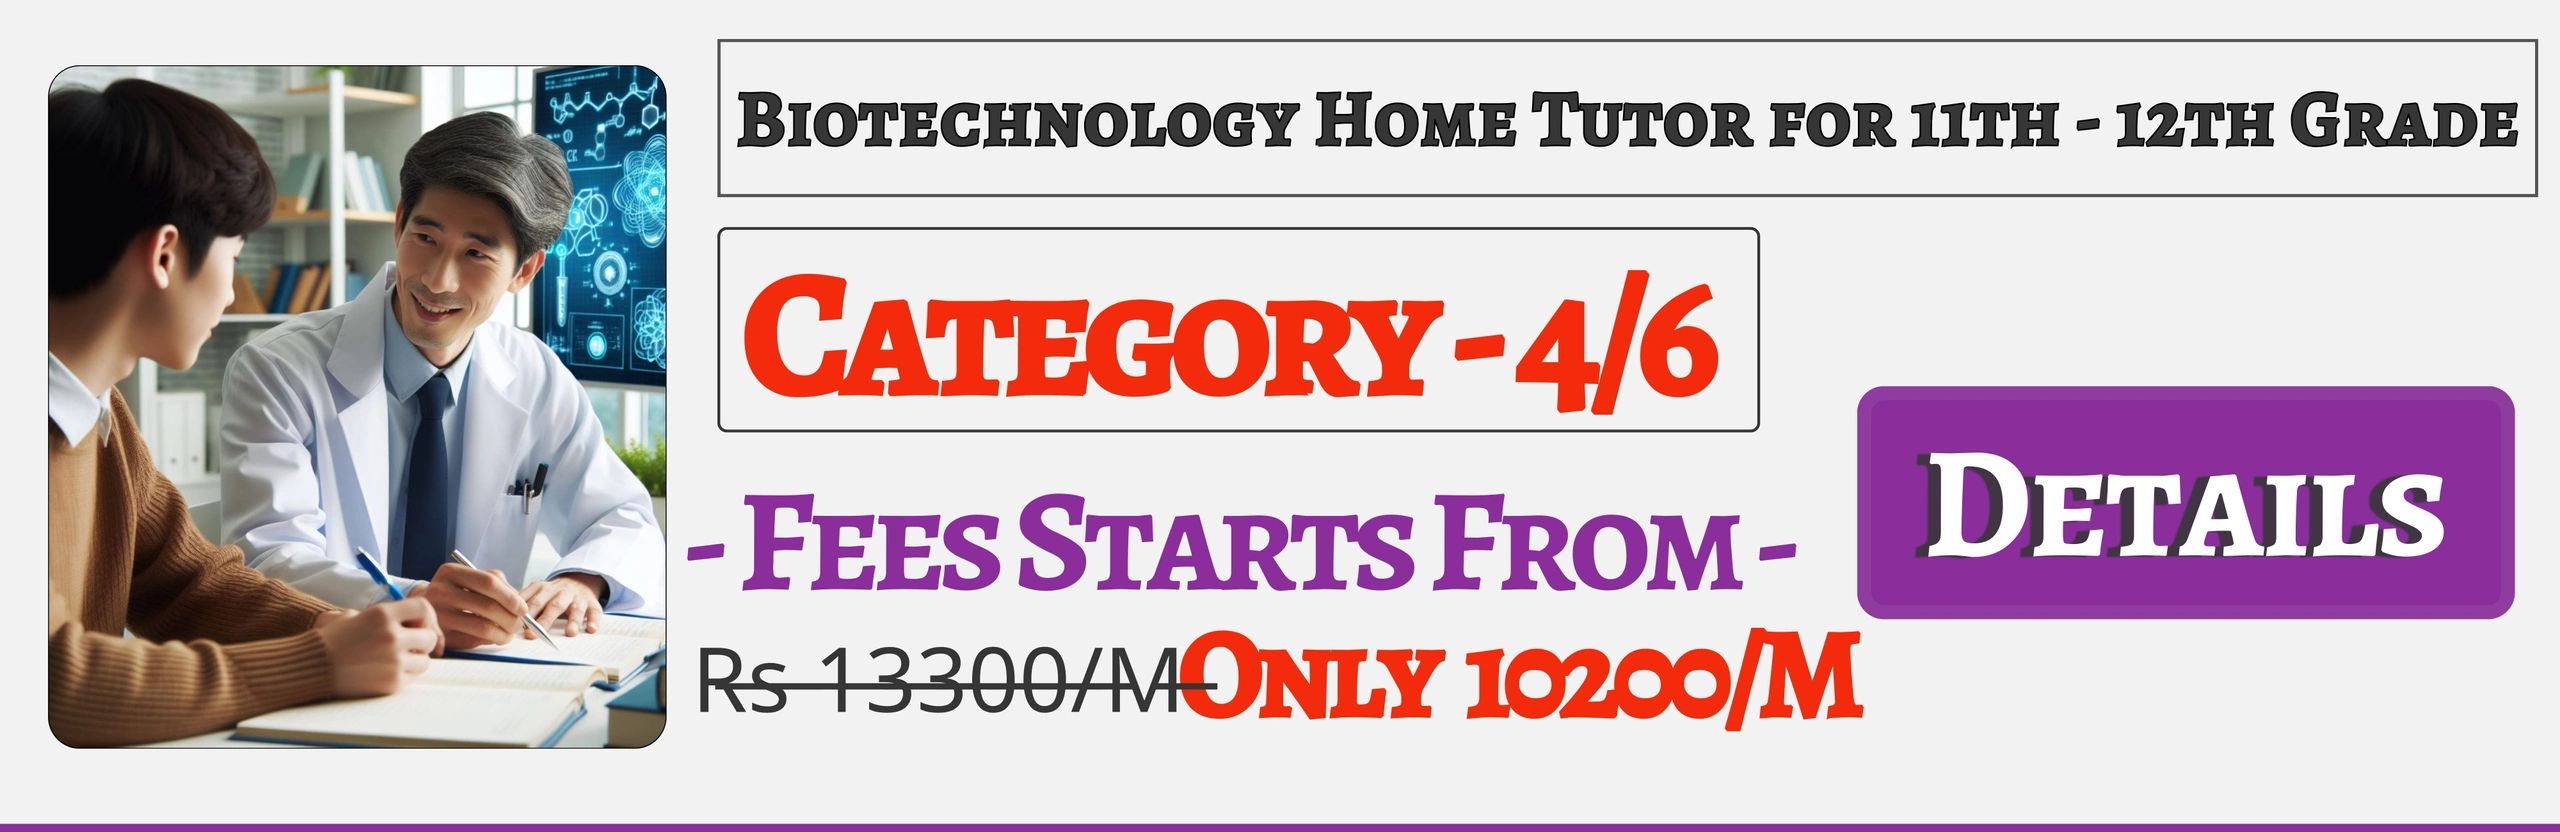 Book Best Nearby Biotechnology Home Tuition Tutors For 11th & 12th In Jaipur , Fees Only 10200/M